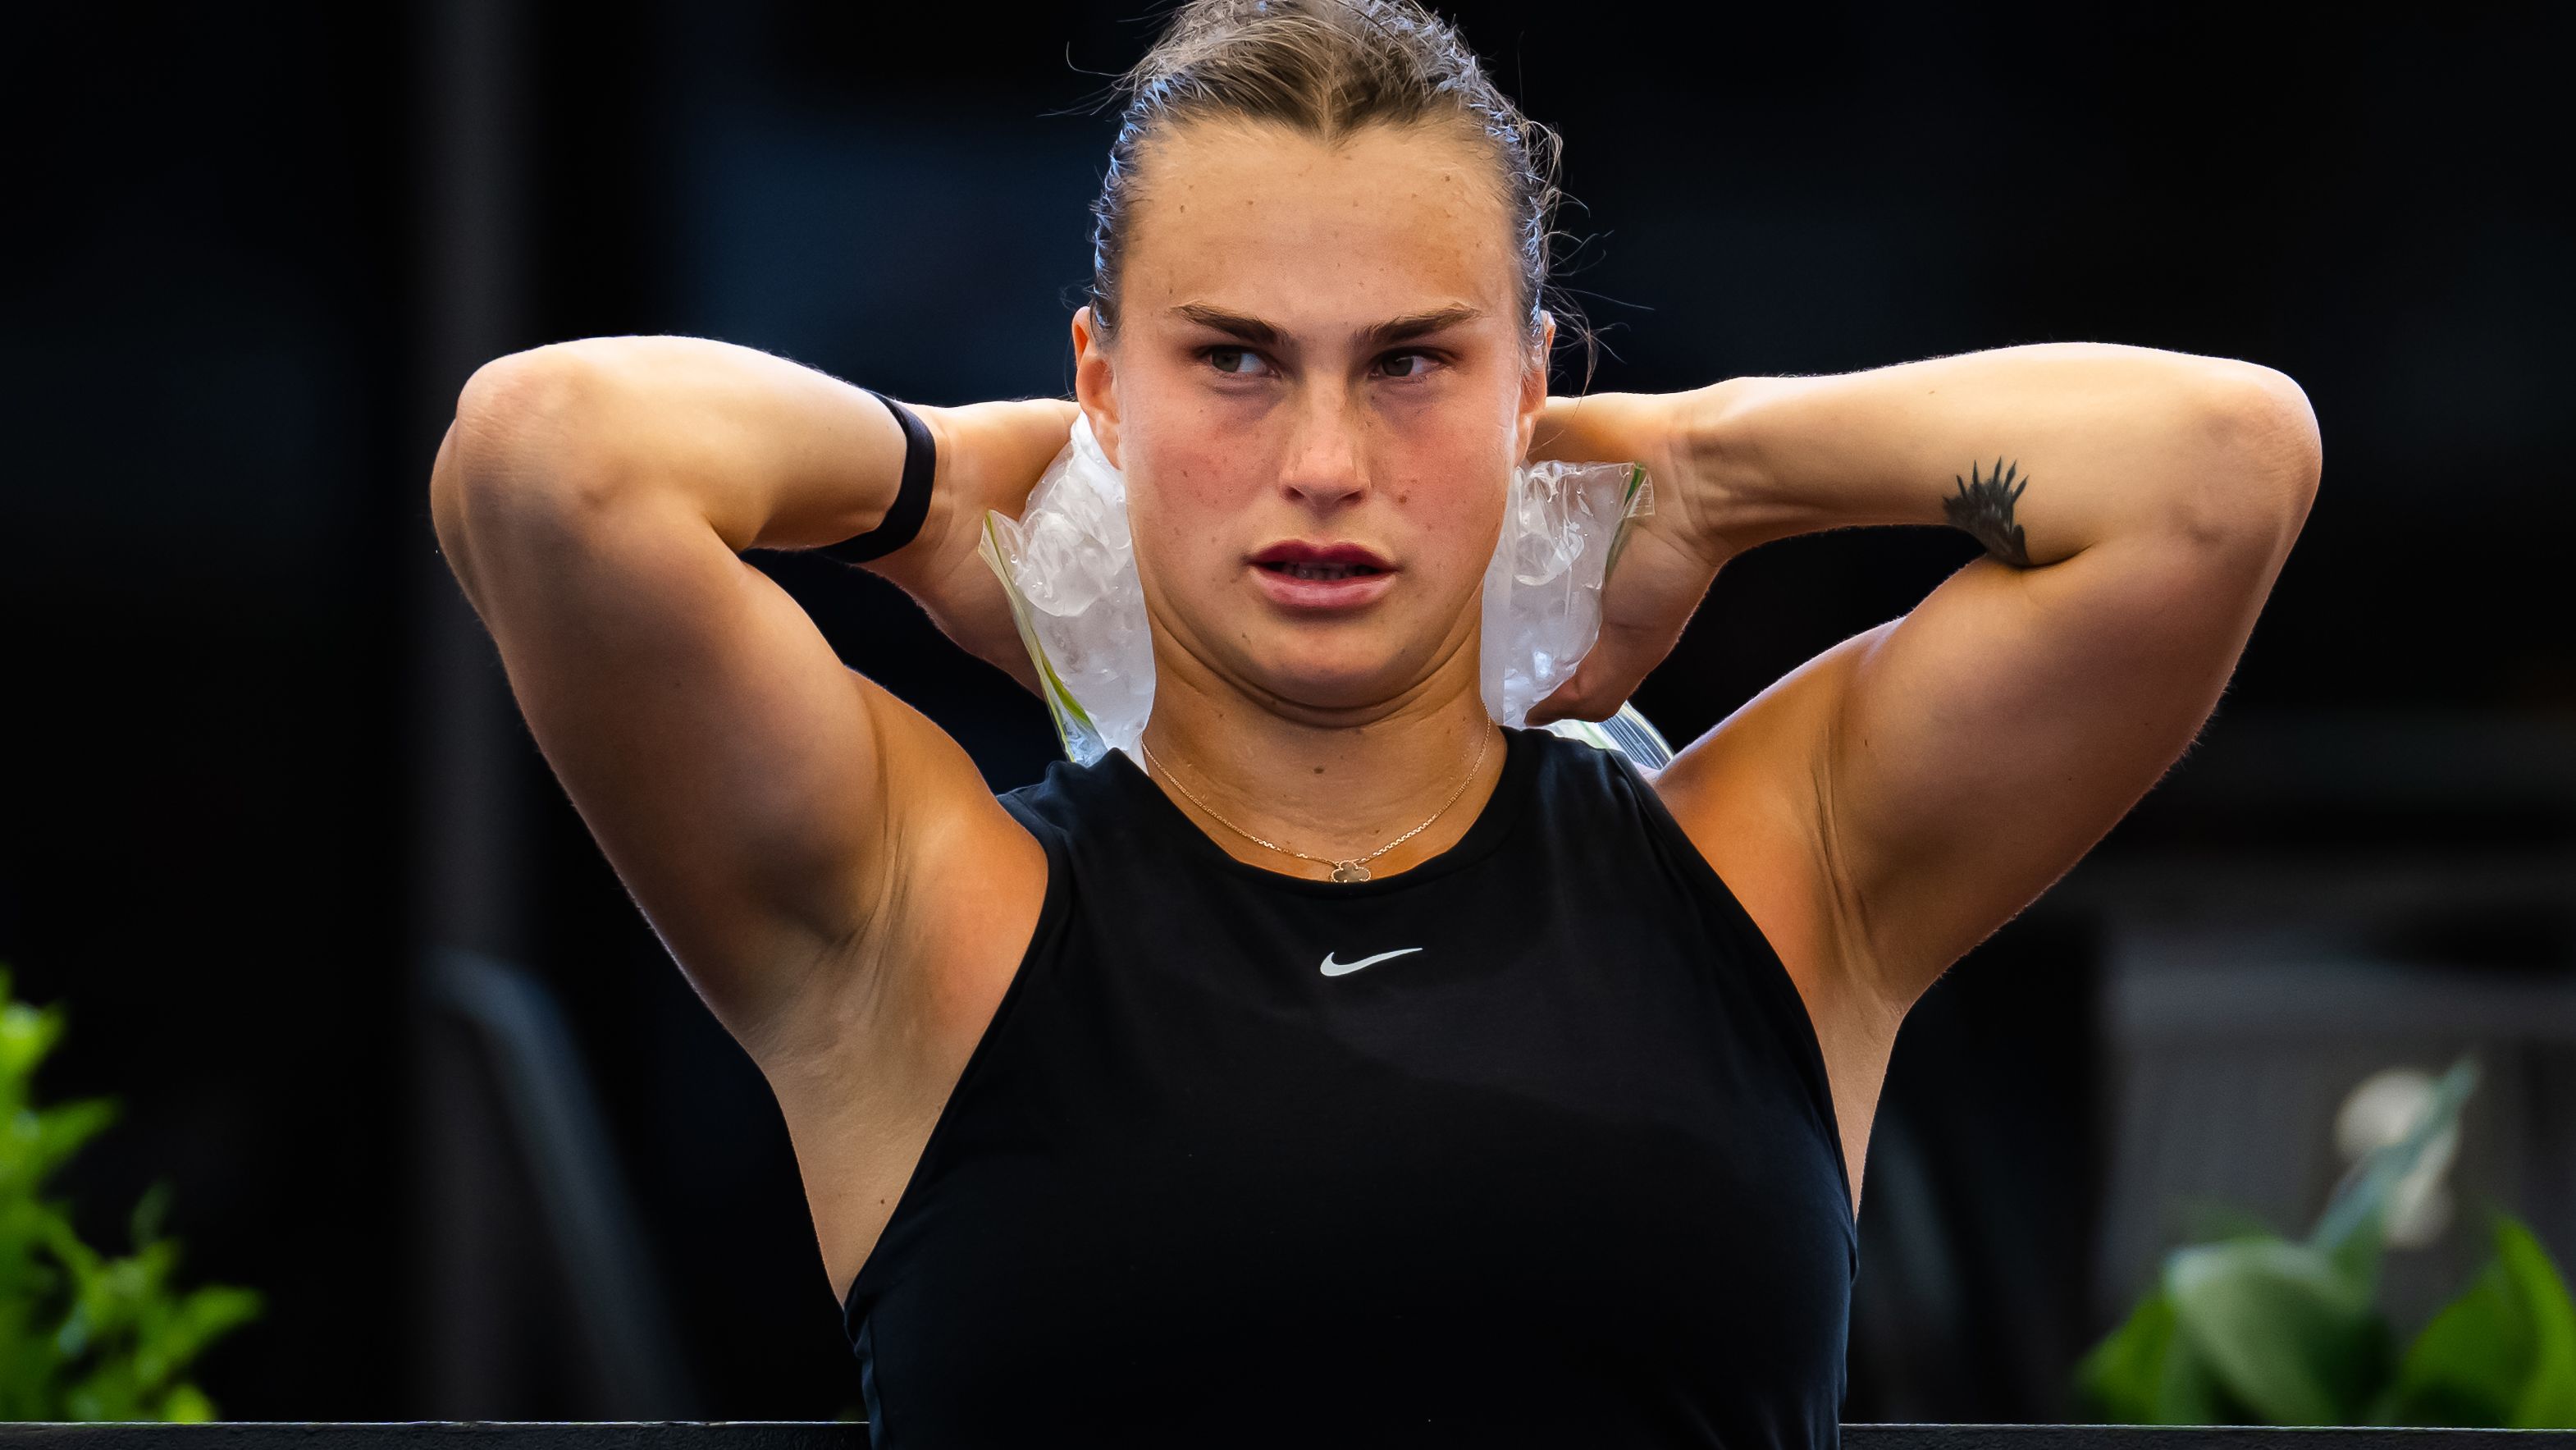 ADELAIDE, AUSTRALIA - JANUARY 07: Aryna Sabalenka of Belarus cools herself with ice packs during a change-over while playing against Irina-Camelia Begu of Romania in the semi-final on Day 7 of the 2023 Adelaide International at Memorial Drive on January 07, 2023 in Adelaide, Australia (Photo by Robert Prange/Getty Images)